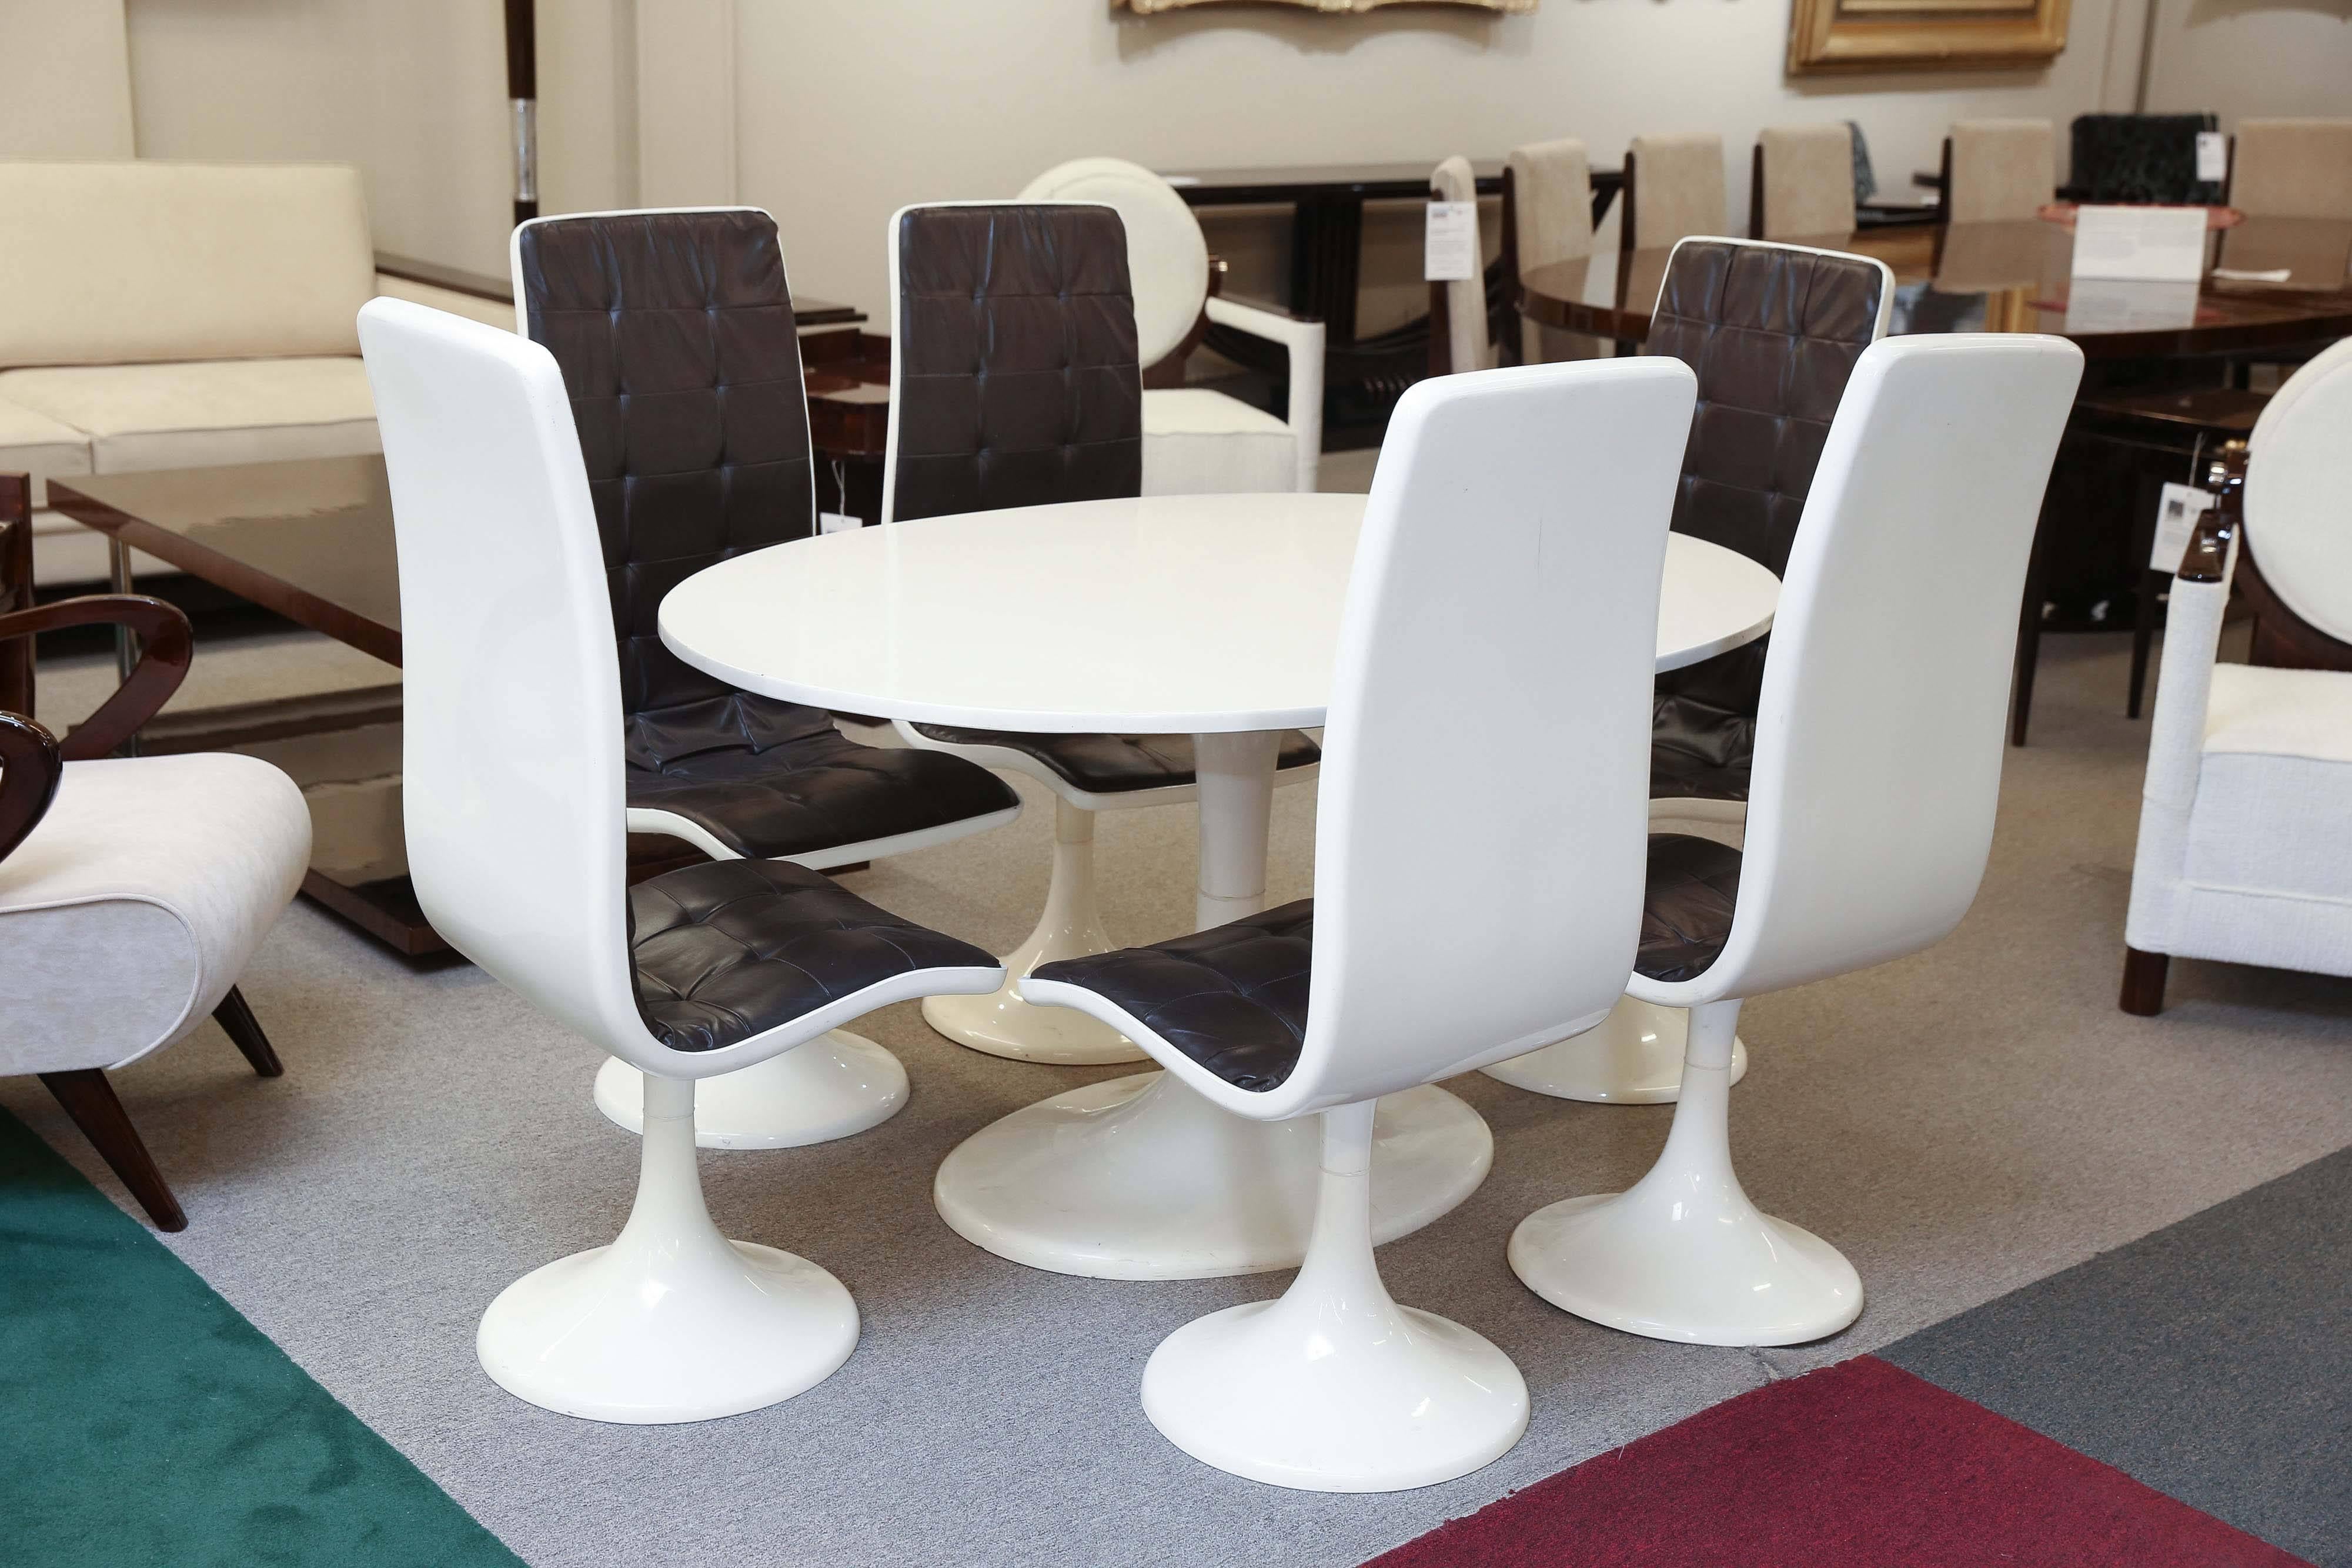 Dining set contains one table and six chairs. All chairs are upholstered in sectioned 